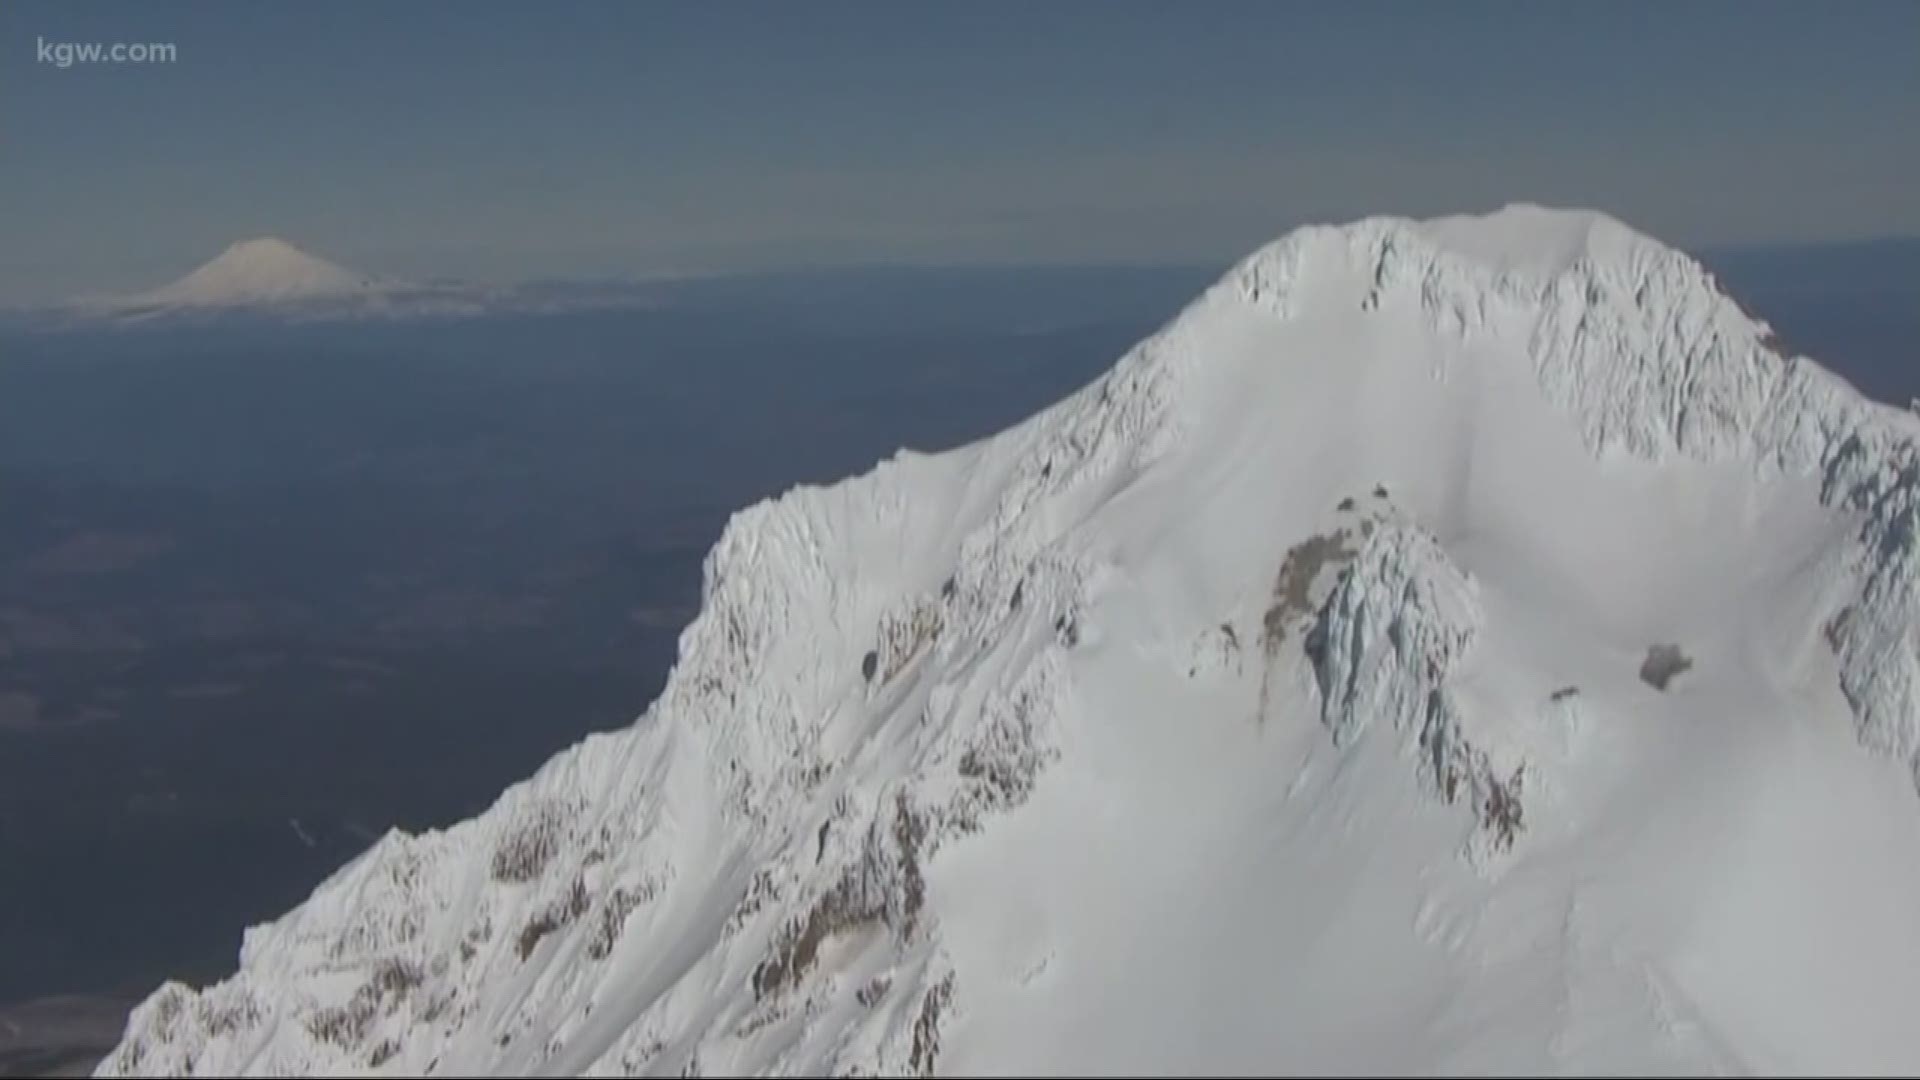 A new study found faults on Mount Hood could trigger a devastating earthquake.